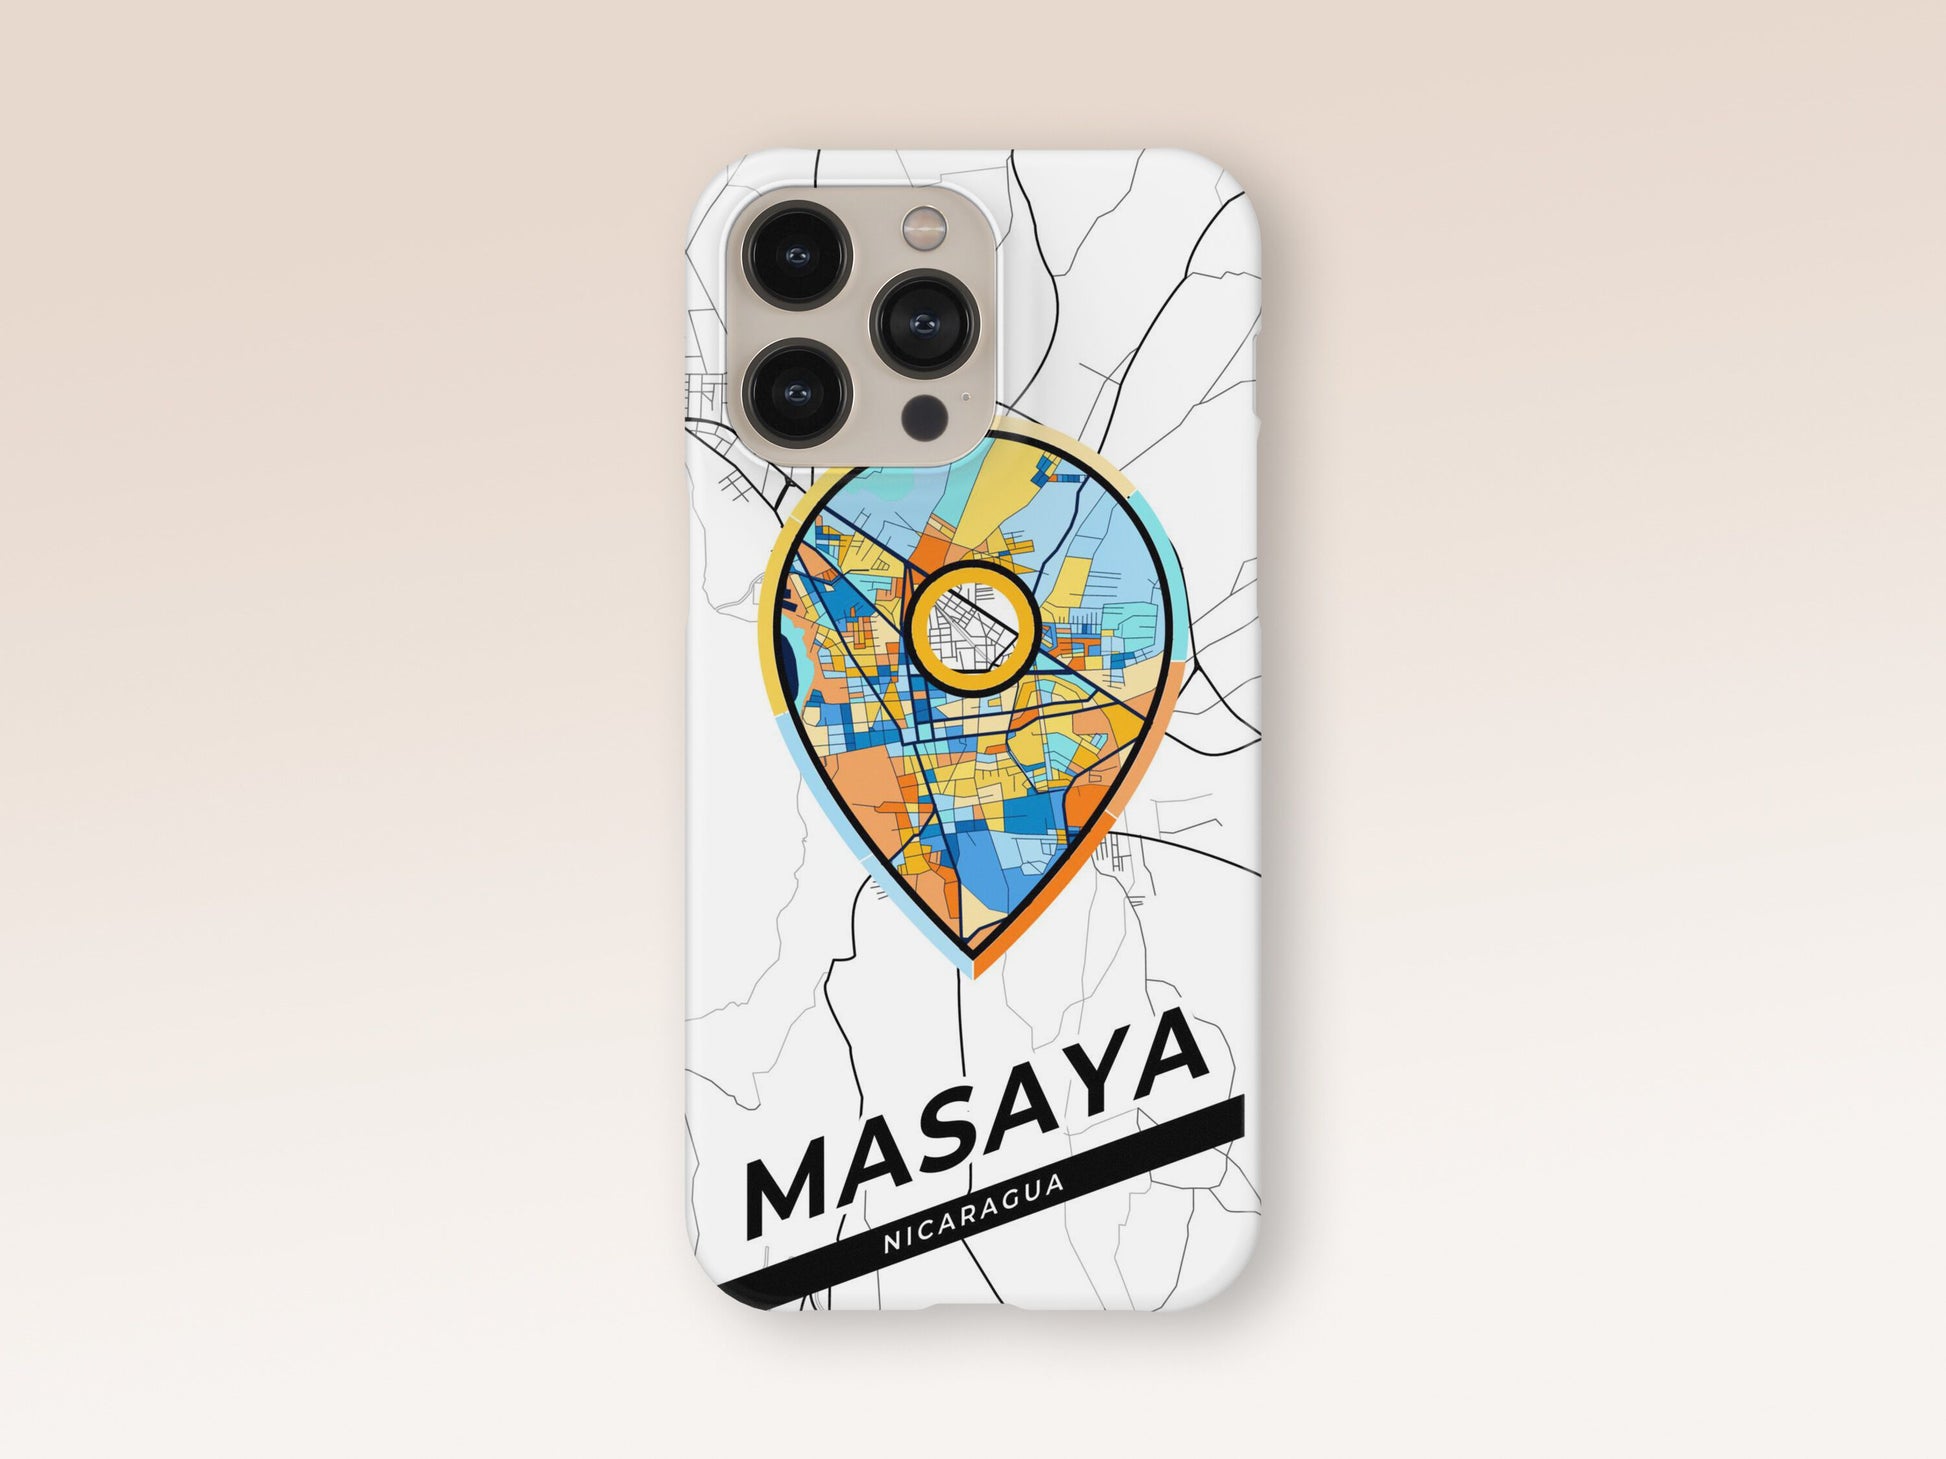 Masaya Nicaragua slim phone case with colorful icon. Birthday, wedding or housewarming gift. Couple match cases. 1